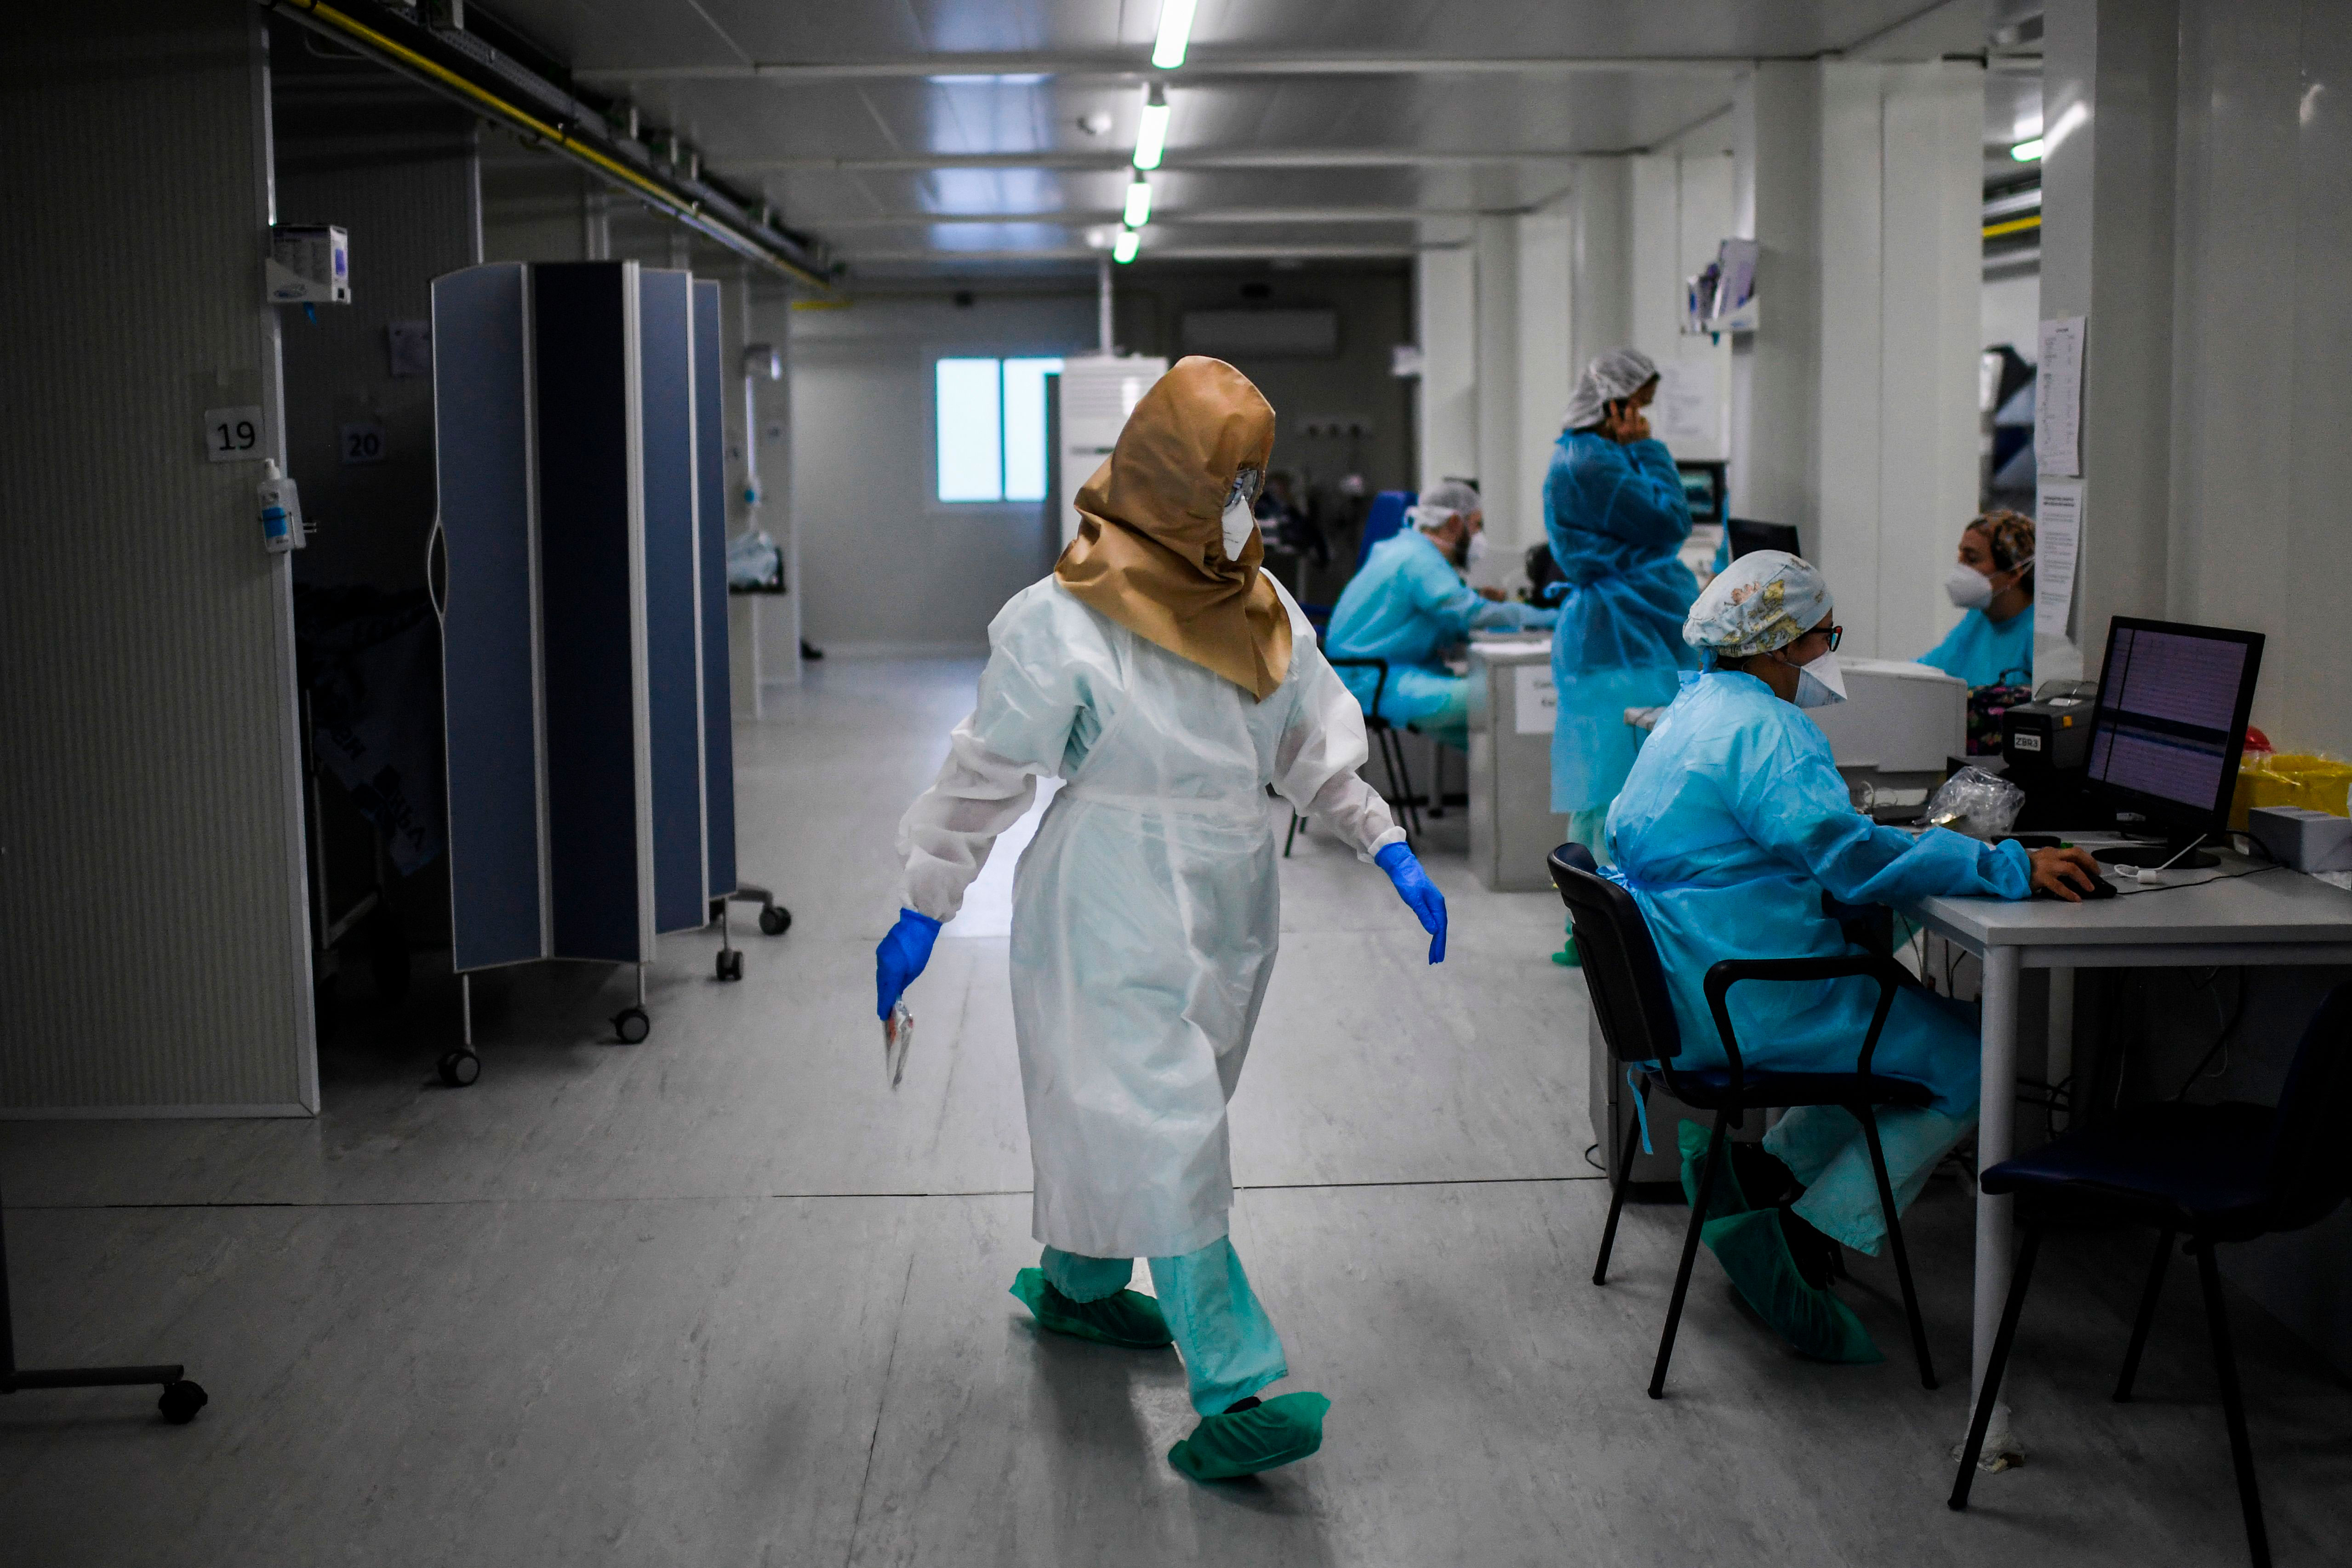 A health care worker walks in the Covid-19 emergency room of Santa Maria hospital in Lisbon, Portugal, on January 11.